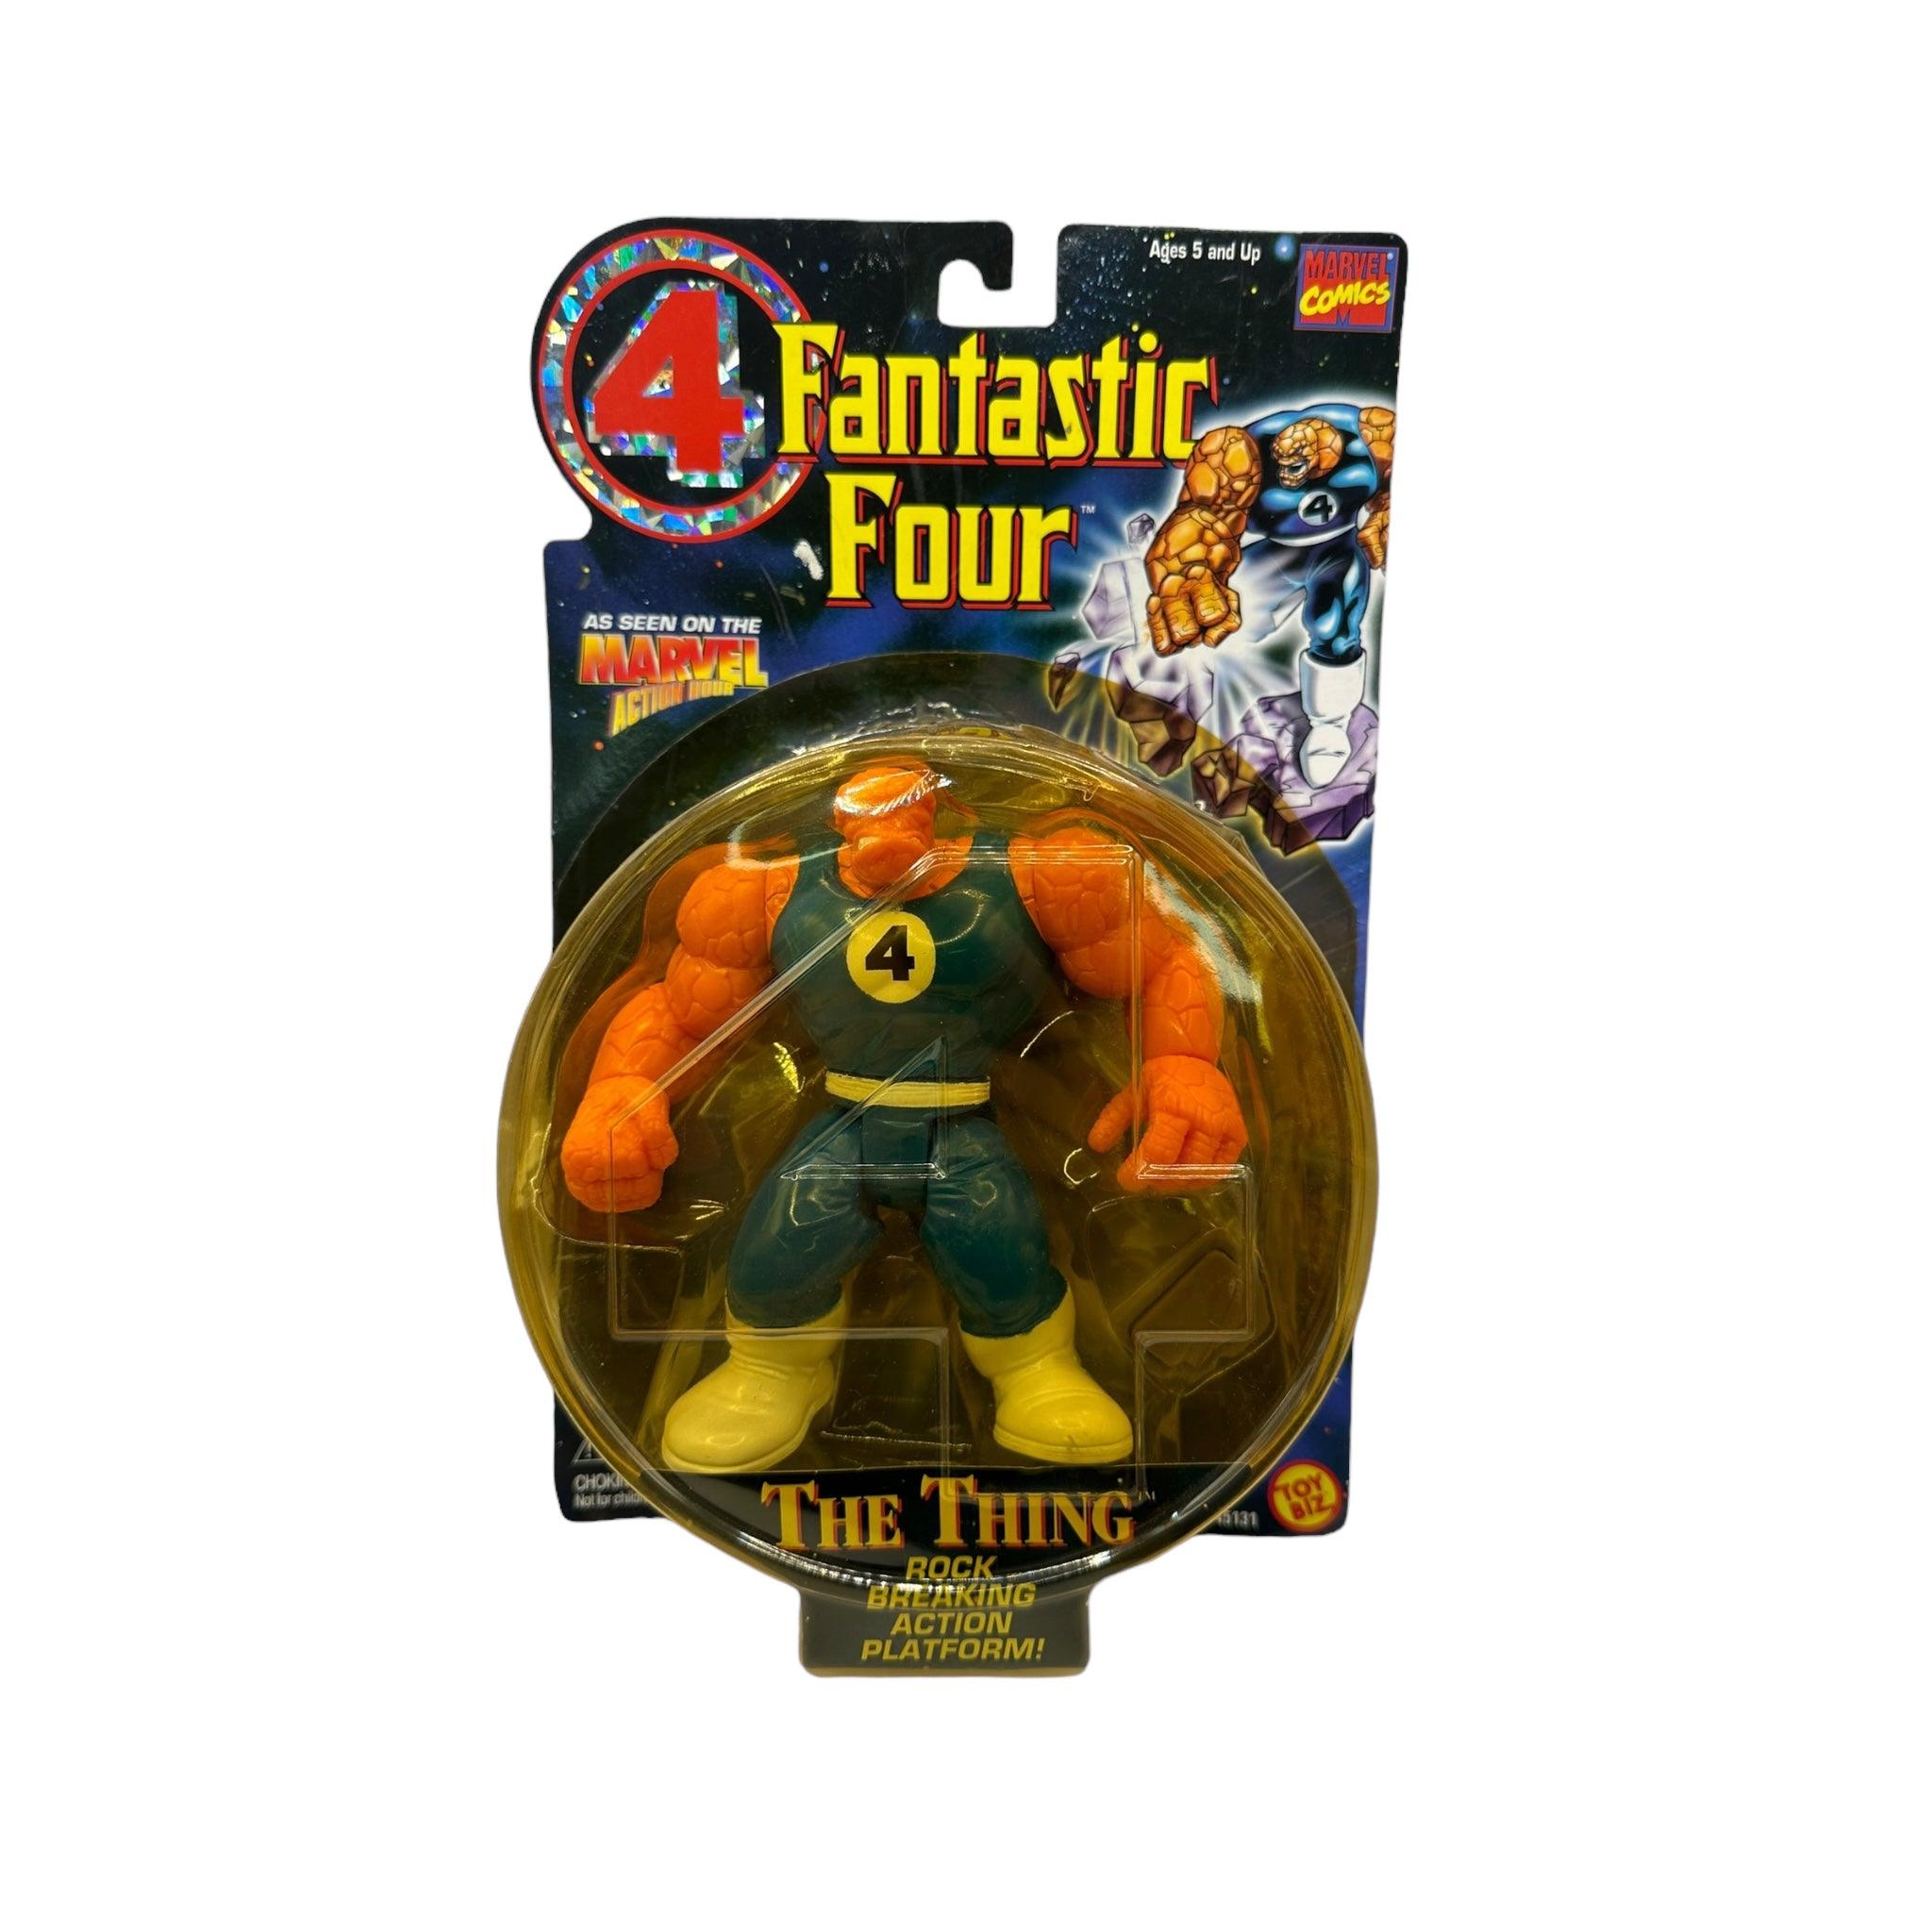 1996 TOYBIZ FANTASTIC FOUR SERIES 4 THE THING AF (YELLOW BUBBLE) - Kings Comics